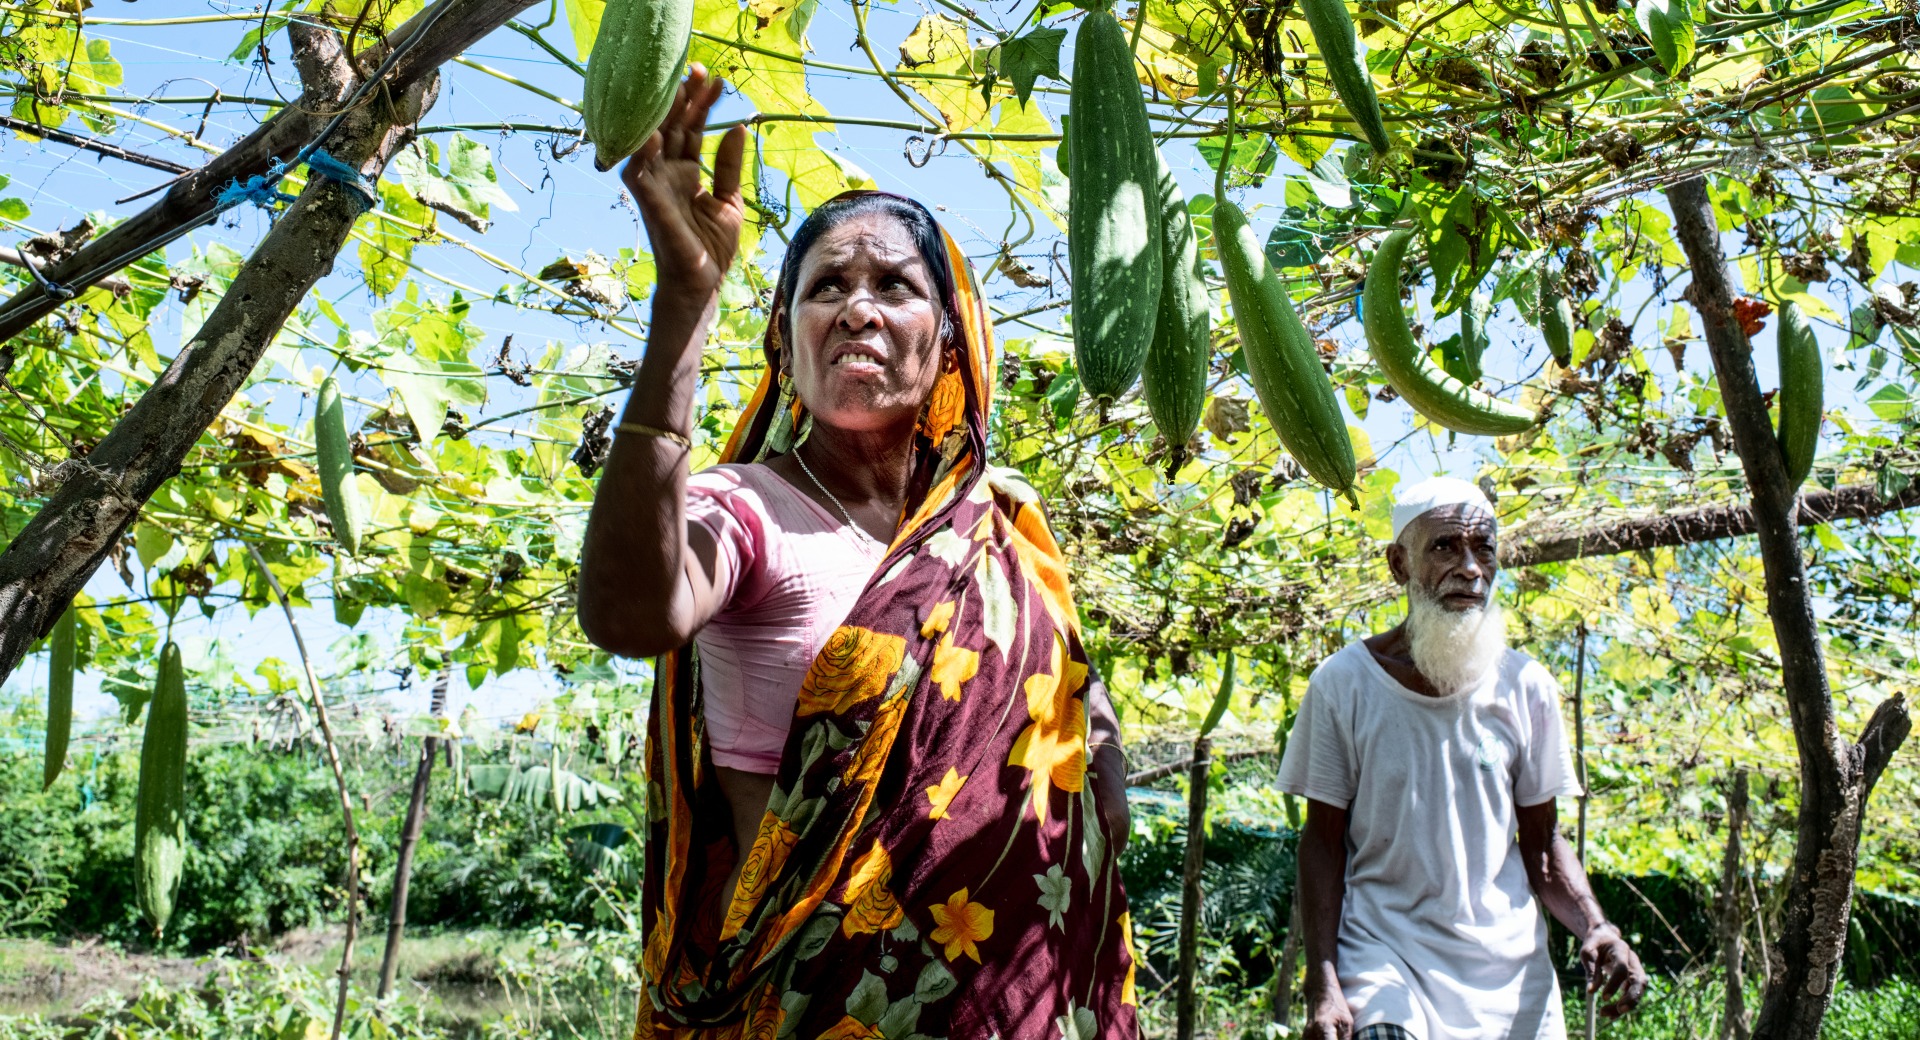 A woman admires the produce growing from above in her garden. Her husband stands in the background.